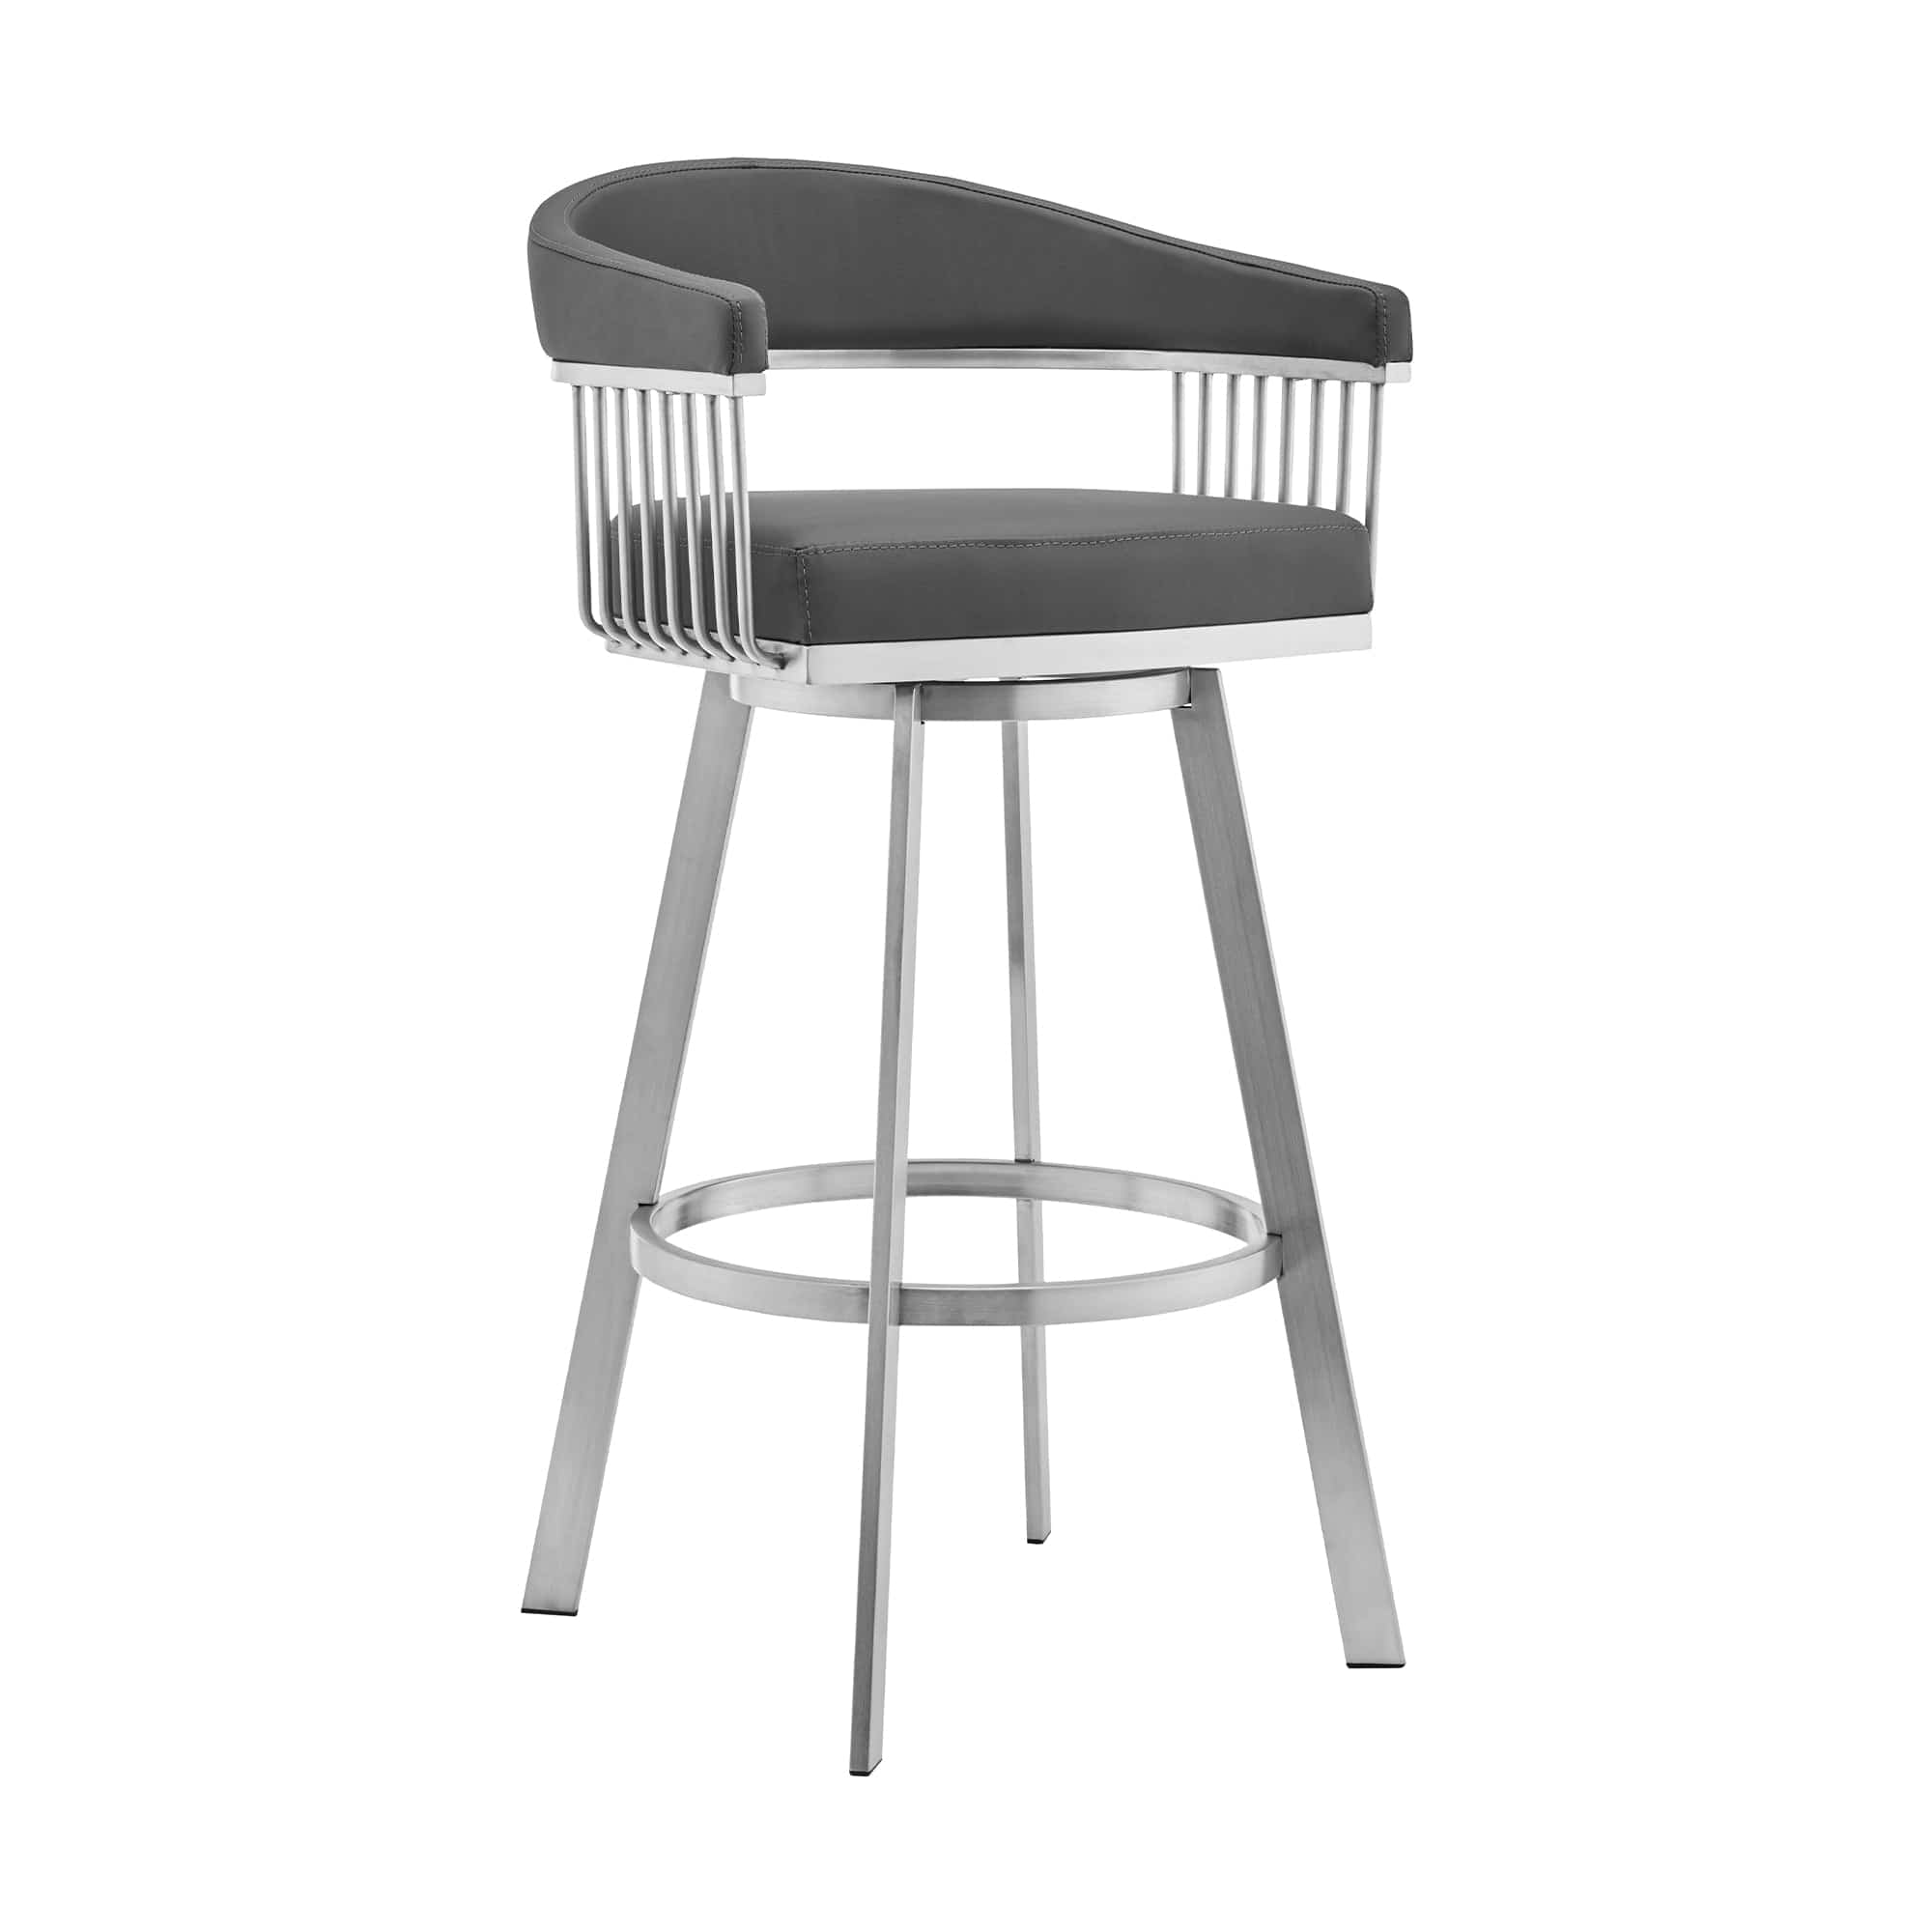 Armen Living Barstool Gray Faux Leather and Brushed Stainless Steel Armen Living - Chelsea 26" Counter Height Swivel Bar Stool in Silver Finish and White Faux Leather | LCCSBASLWH26